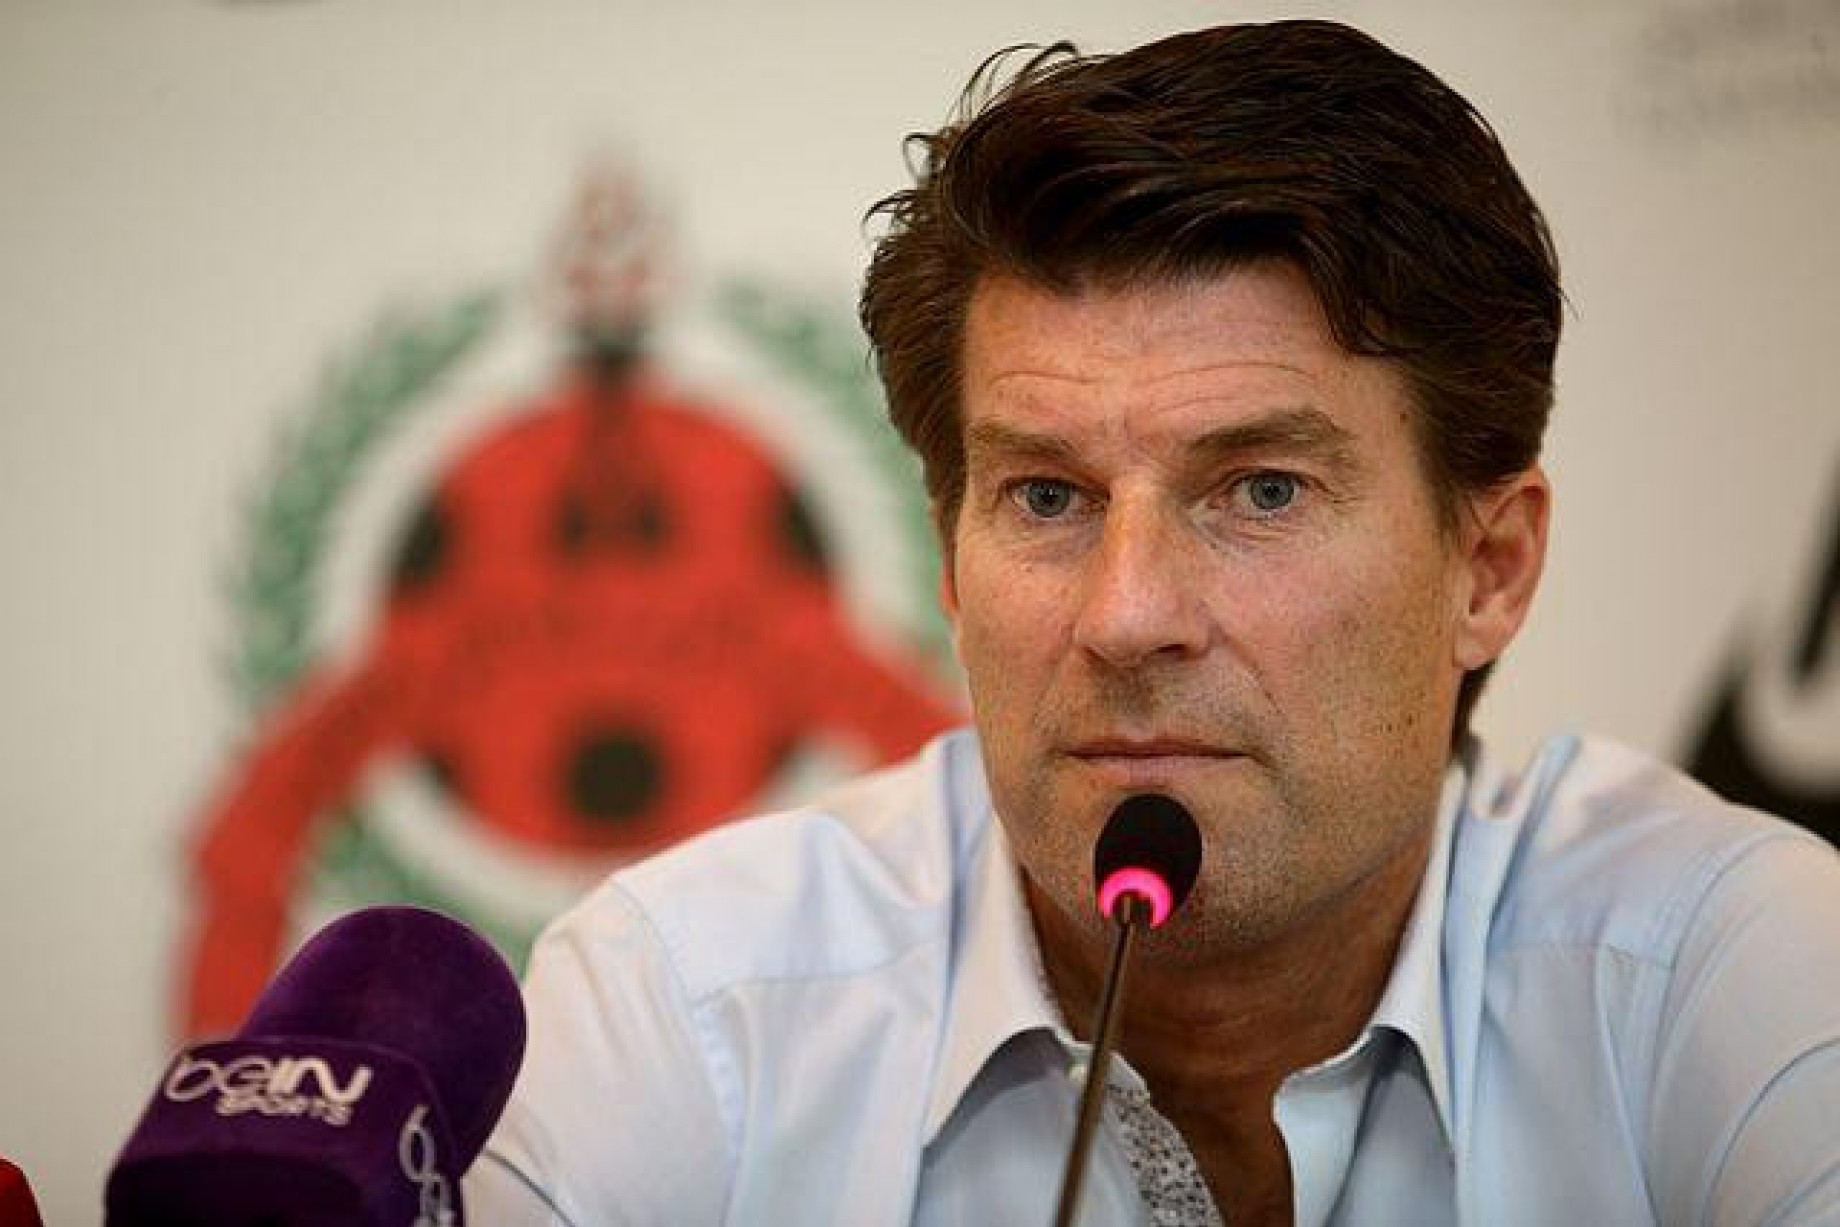 Laudrup x gallery